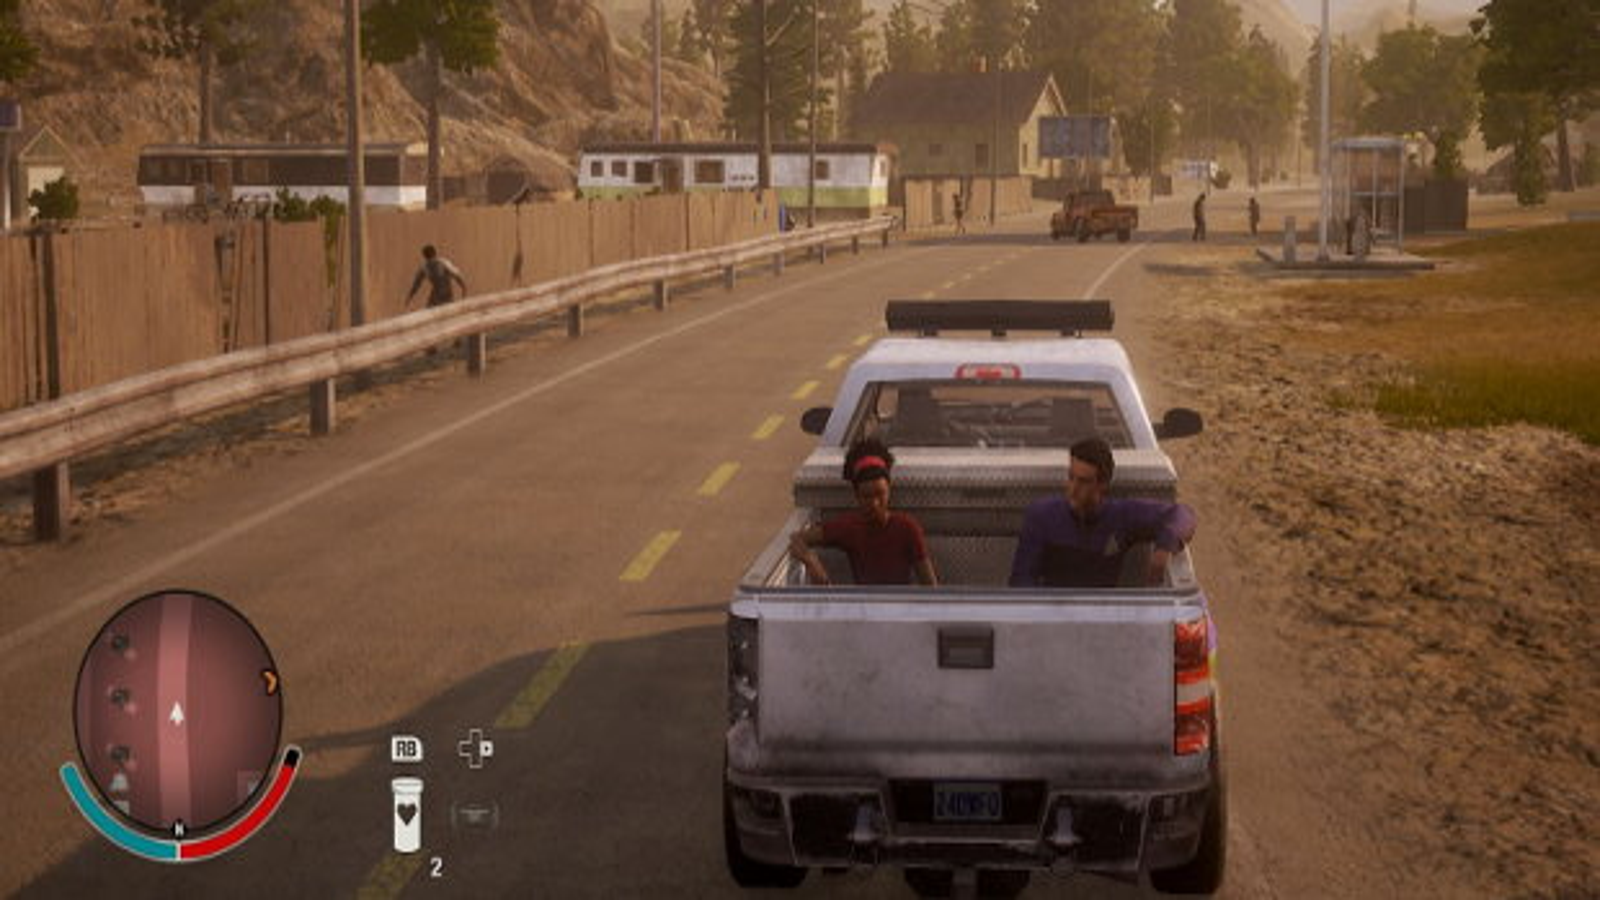 State of Decay GAME MOD The Big Nasty Mod v.1.2 - download